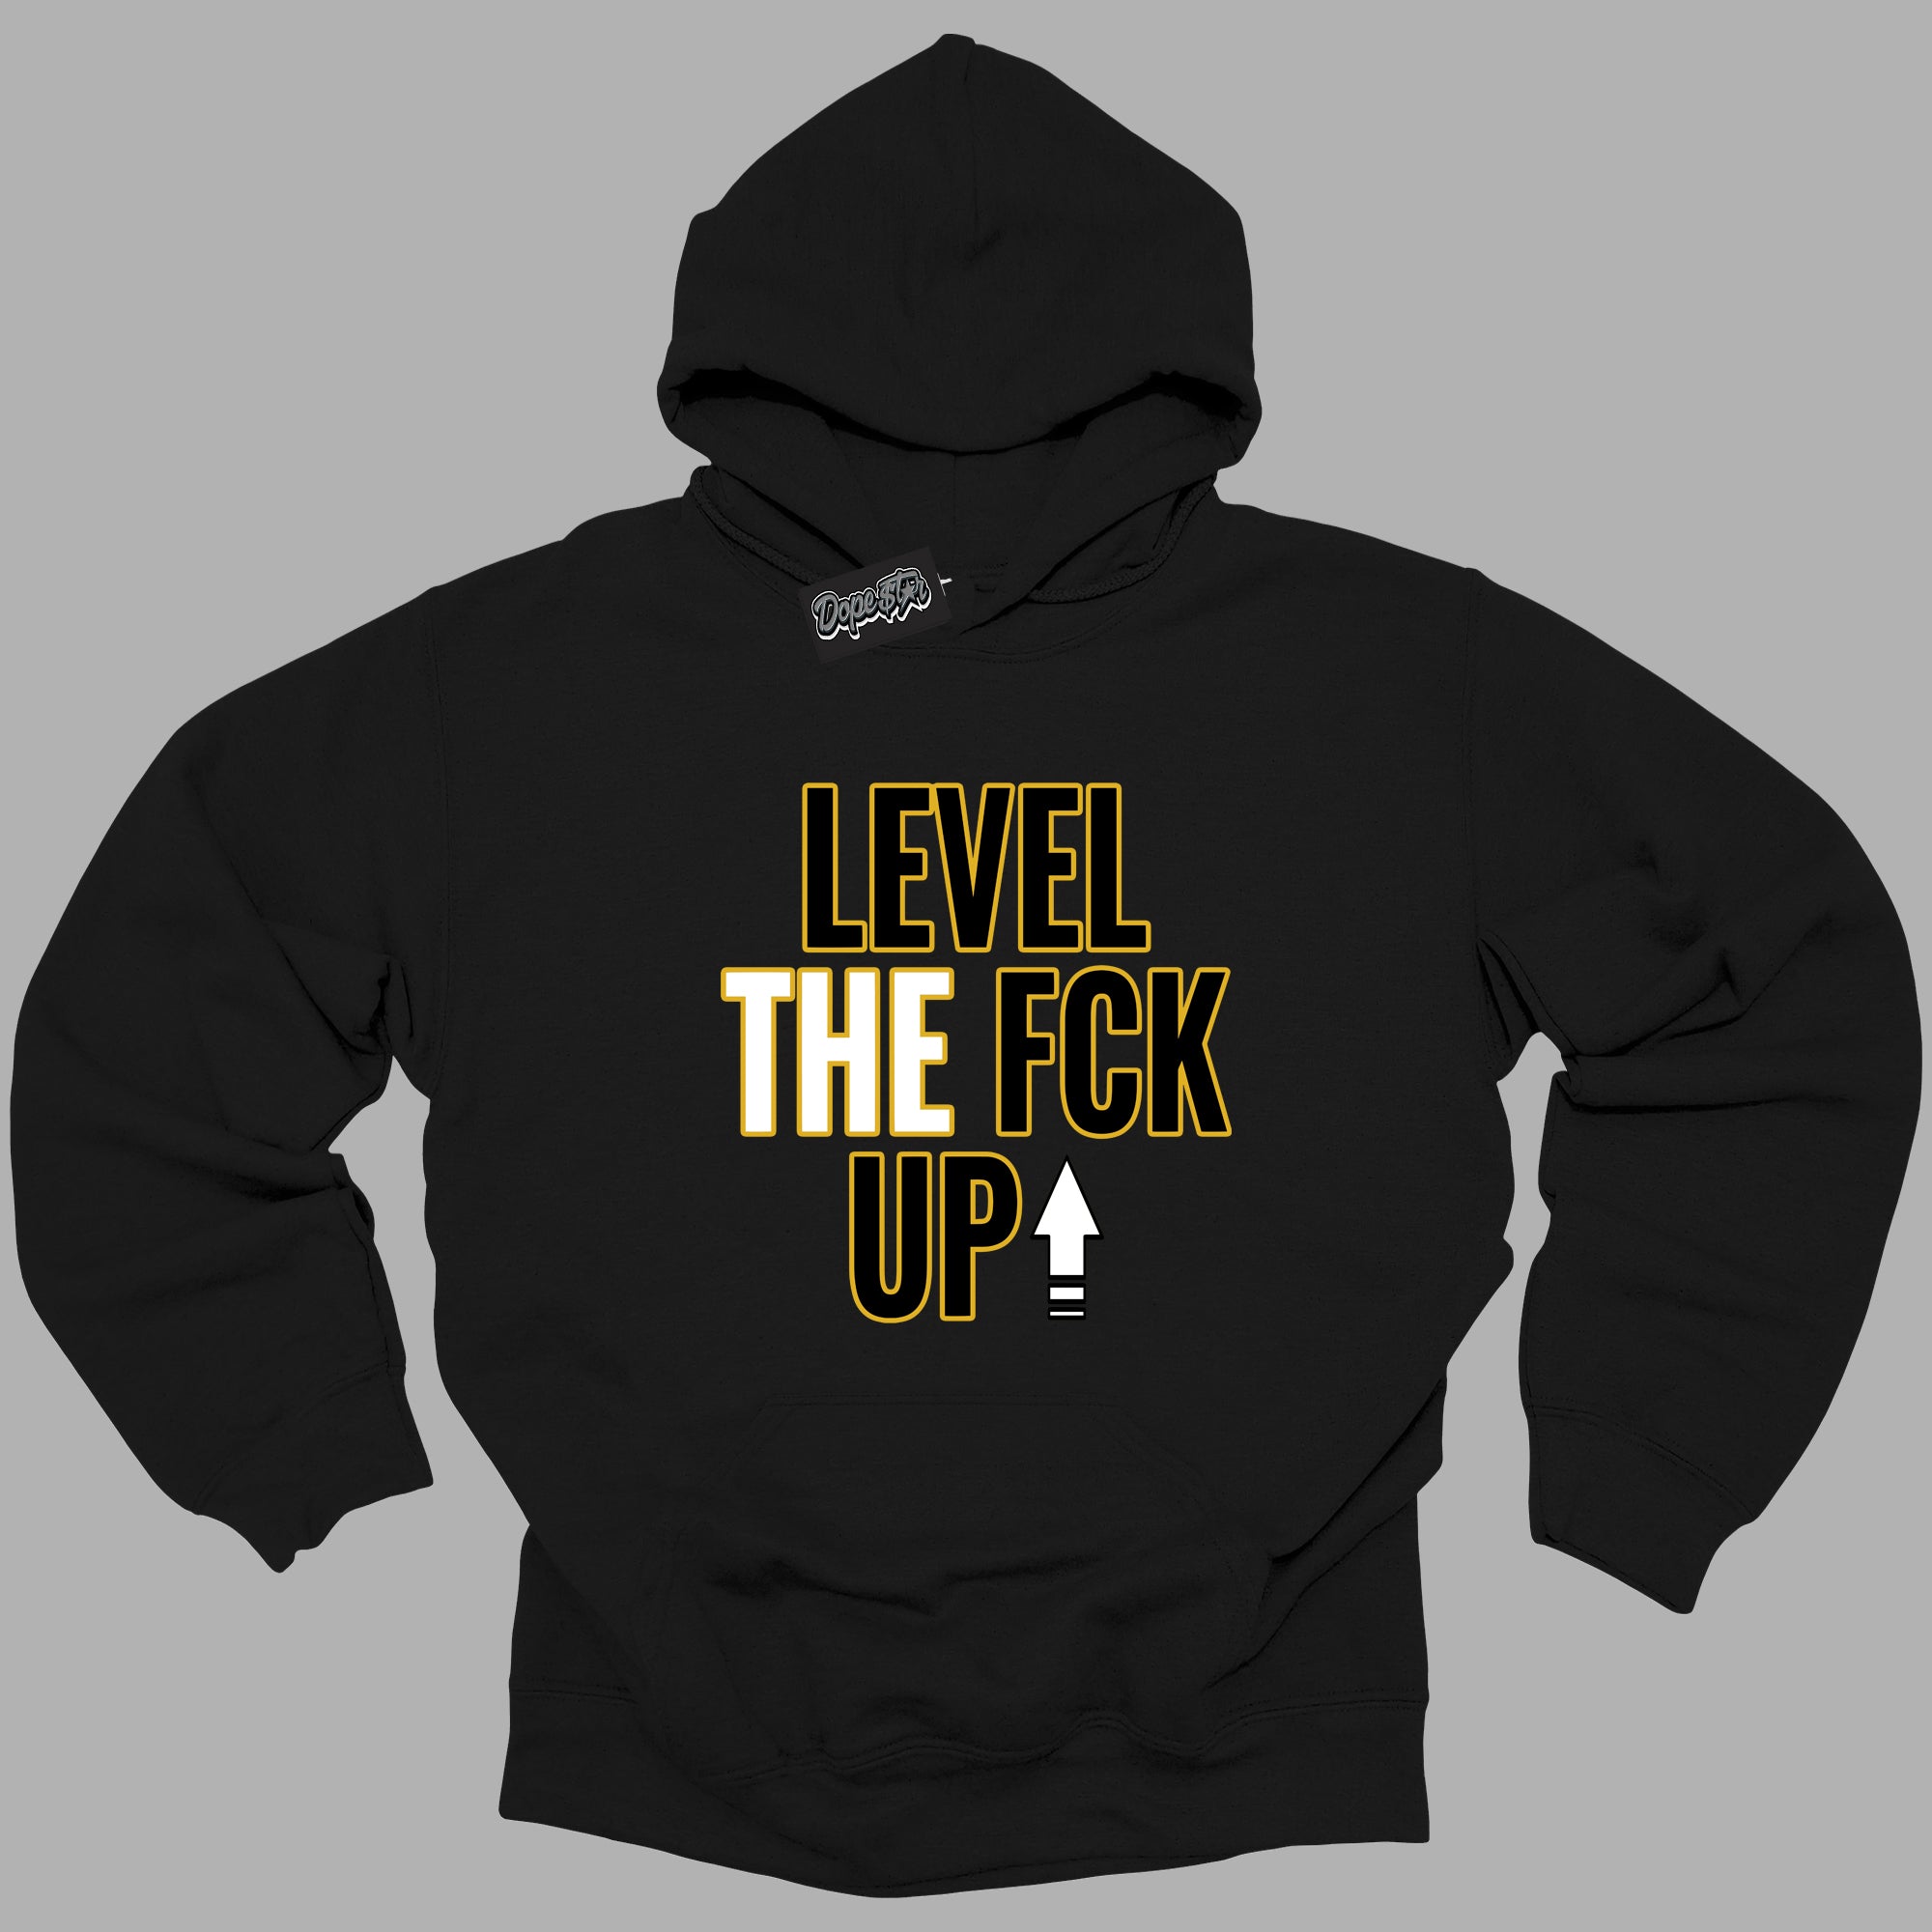 Cool Black Hoodie with “ Level The Fck Up ”  design that Perfectly Matches Yellow Ochre 6s Sneakers.